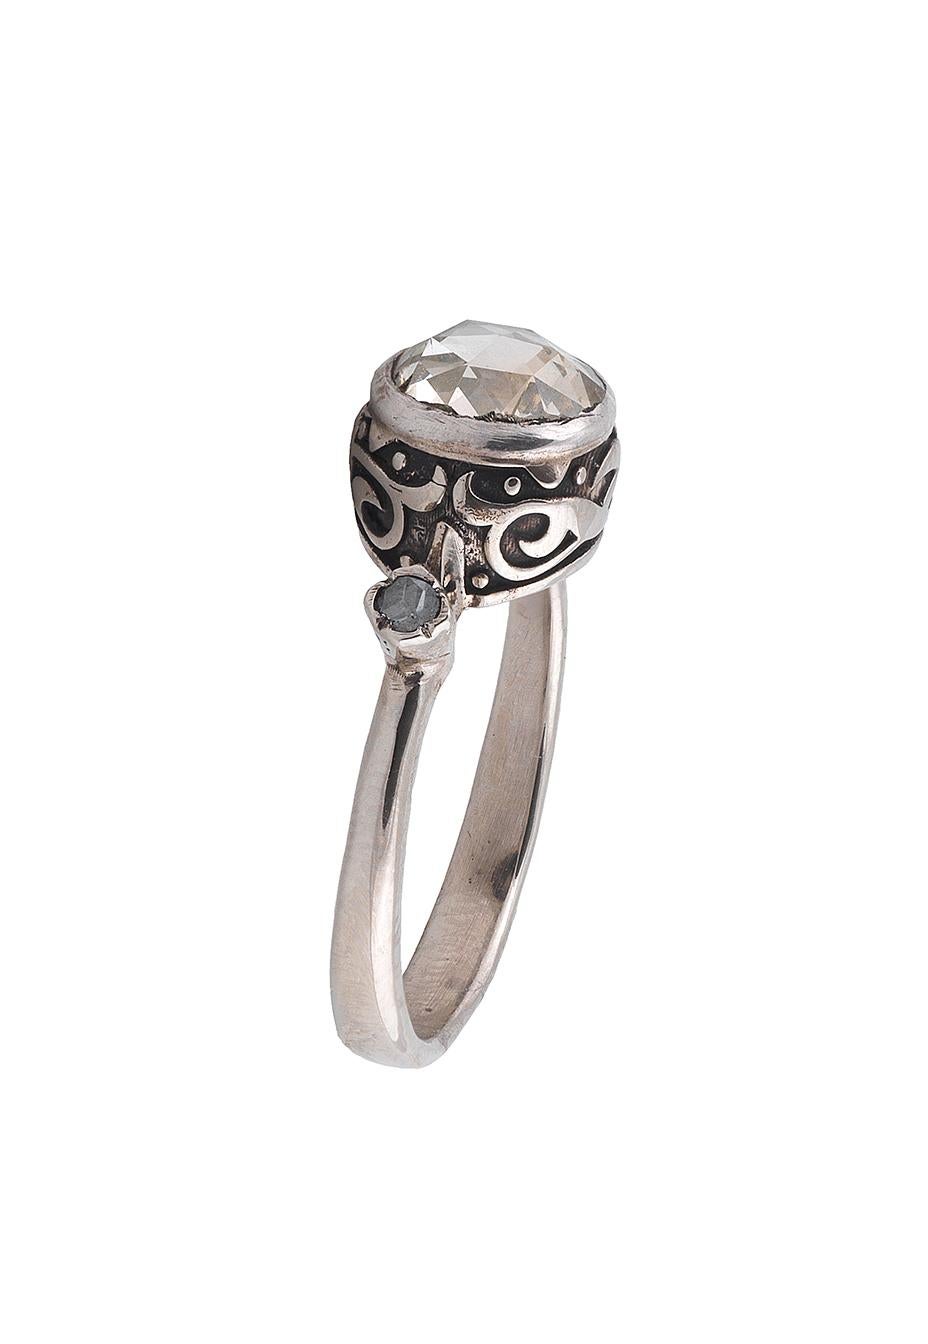 

A rose-cut diamond single-stone ring
The rose-cut diamond in closed back setting to openwork gallery and decorated hoop 
Size 7